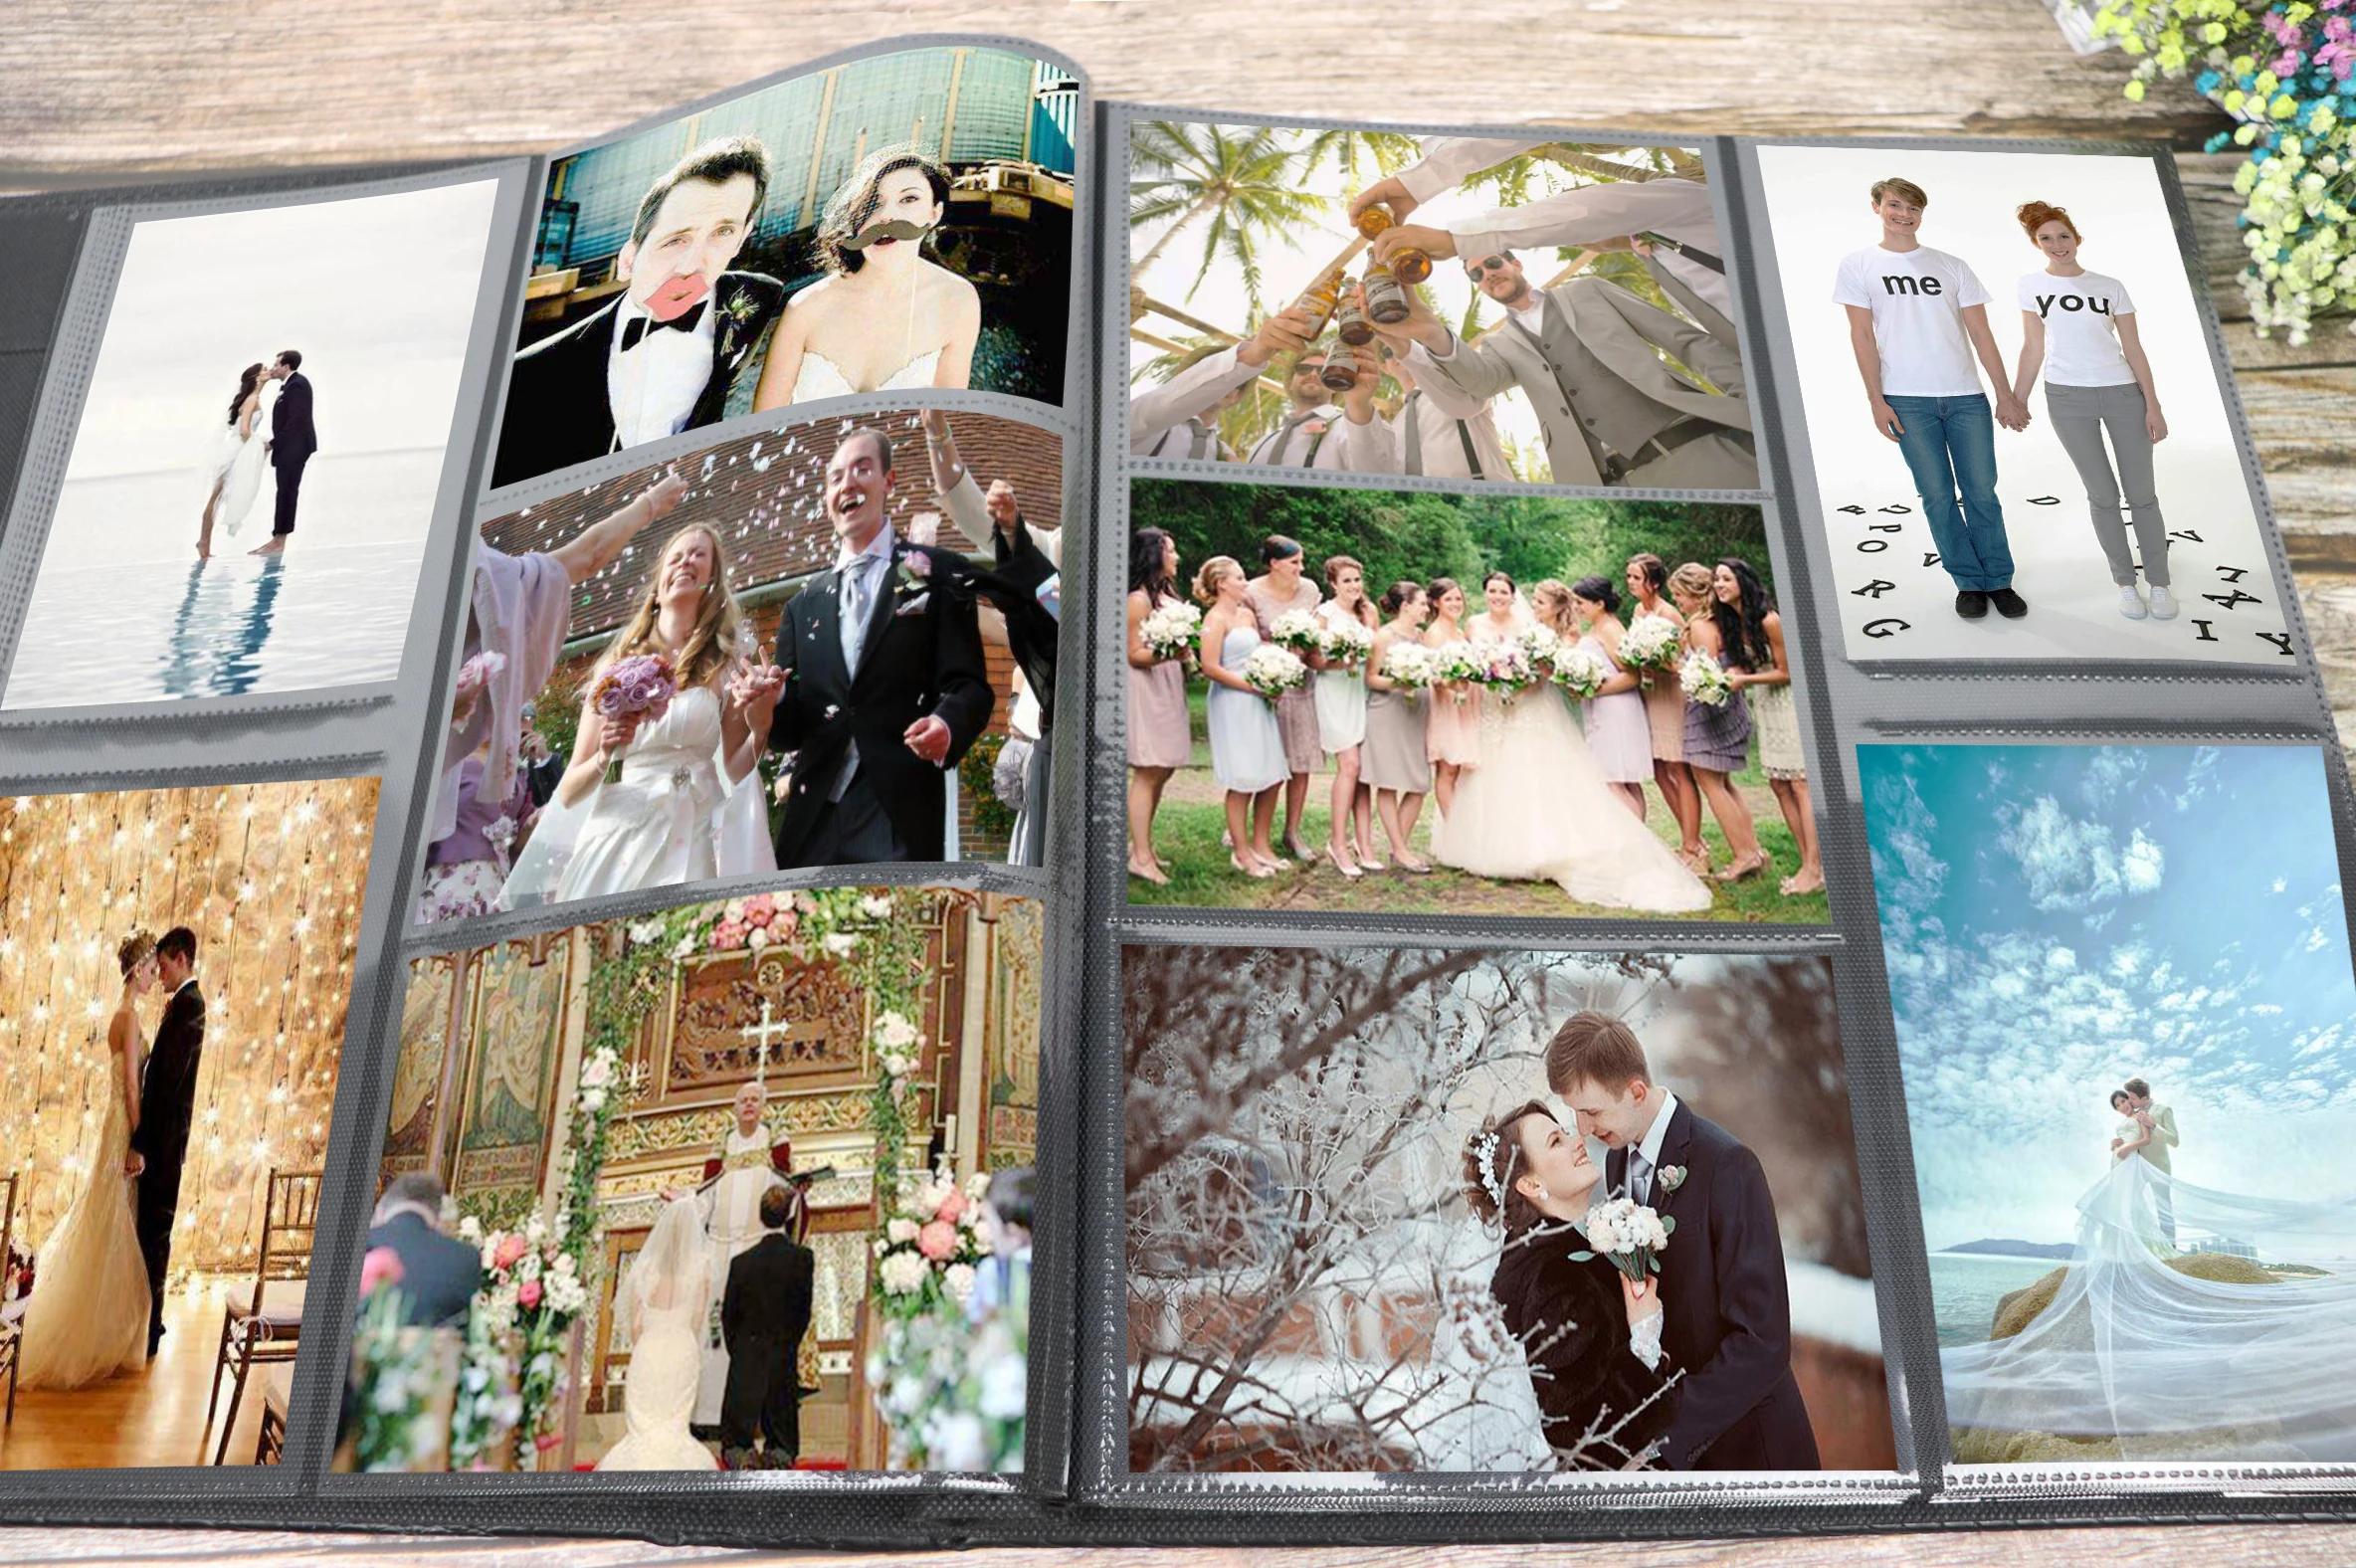 Black Extra Large Capacity Leather Cover Wedding Family Photo Albums Holds 600 Horizontal and Vertical 4x6 Photos with White Pages Artmag Photo Picutre Album 4x6 600 Photos 